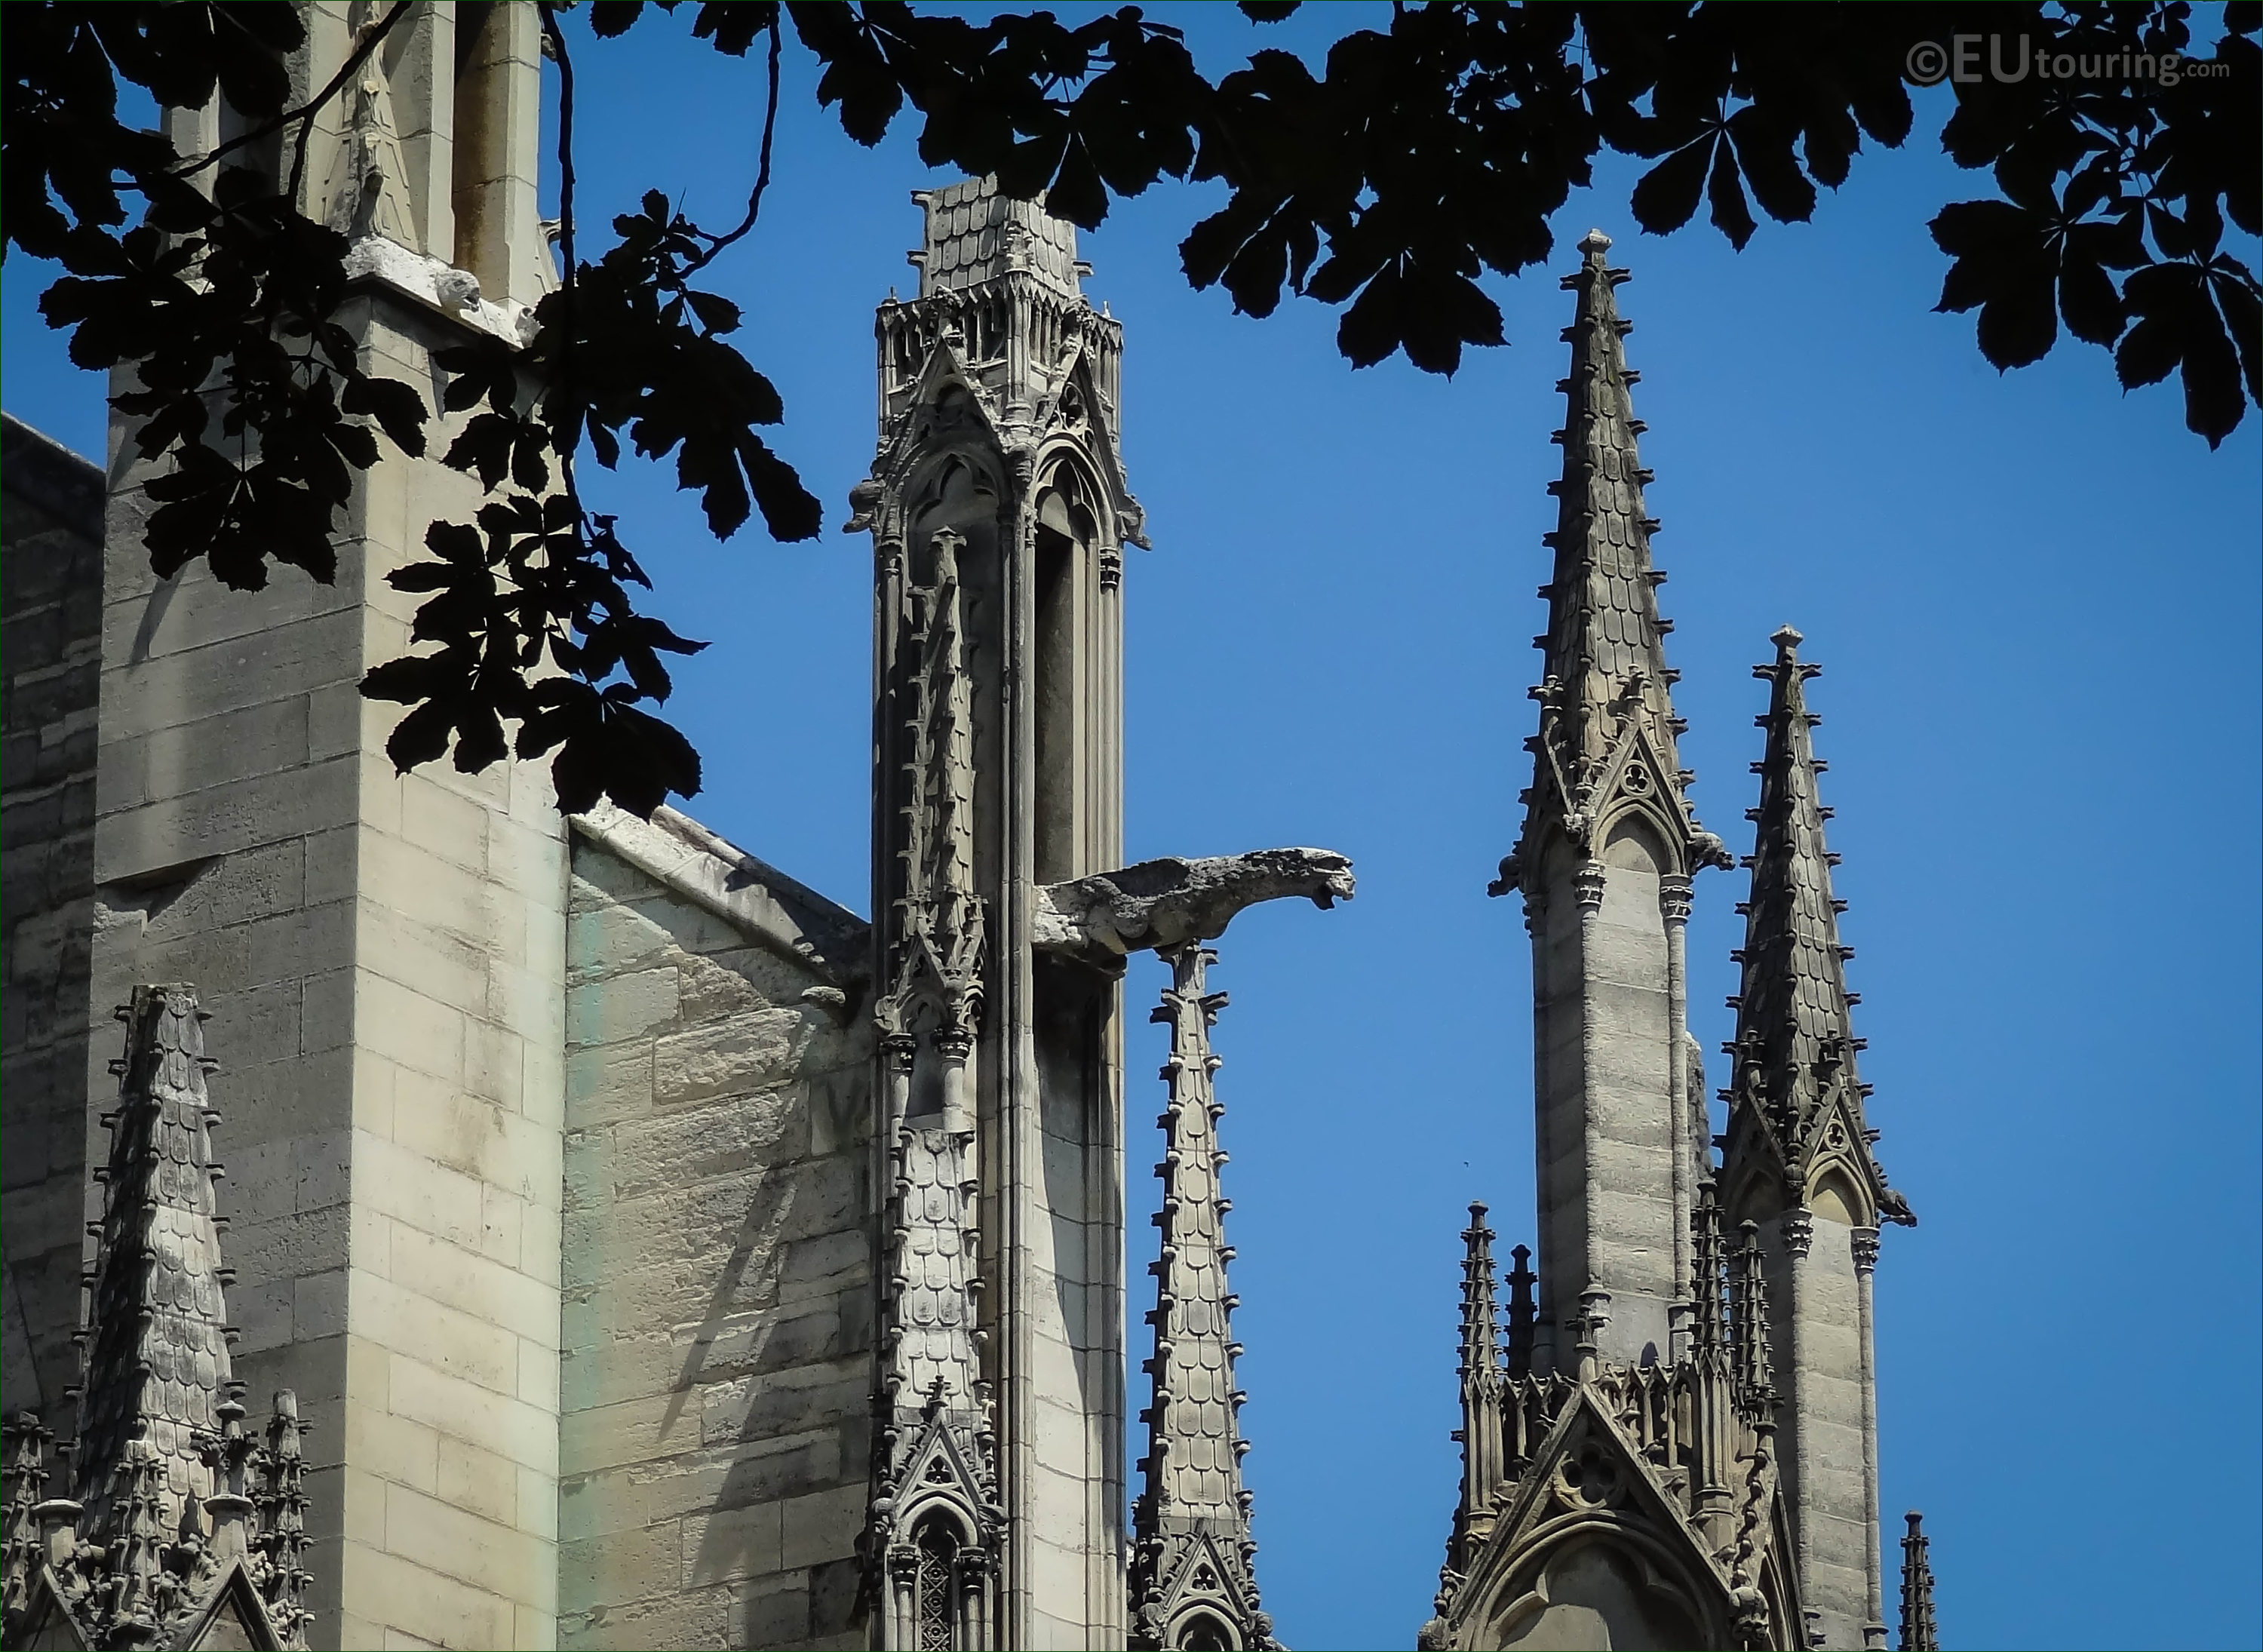 HD photographs of Gargoyles on Notre Dame Cathedral in Paris